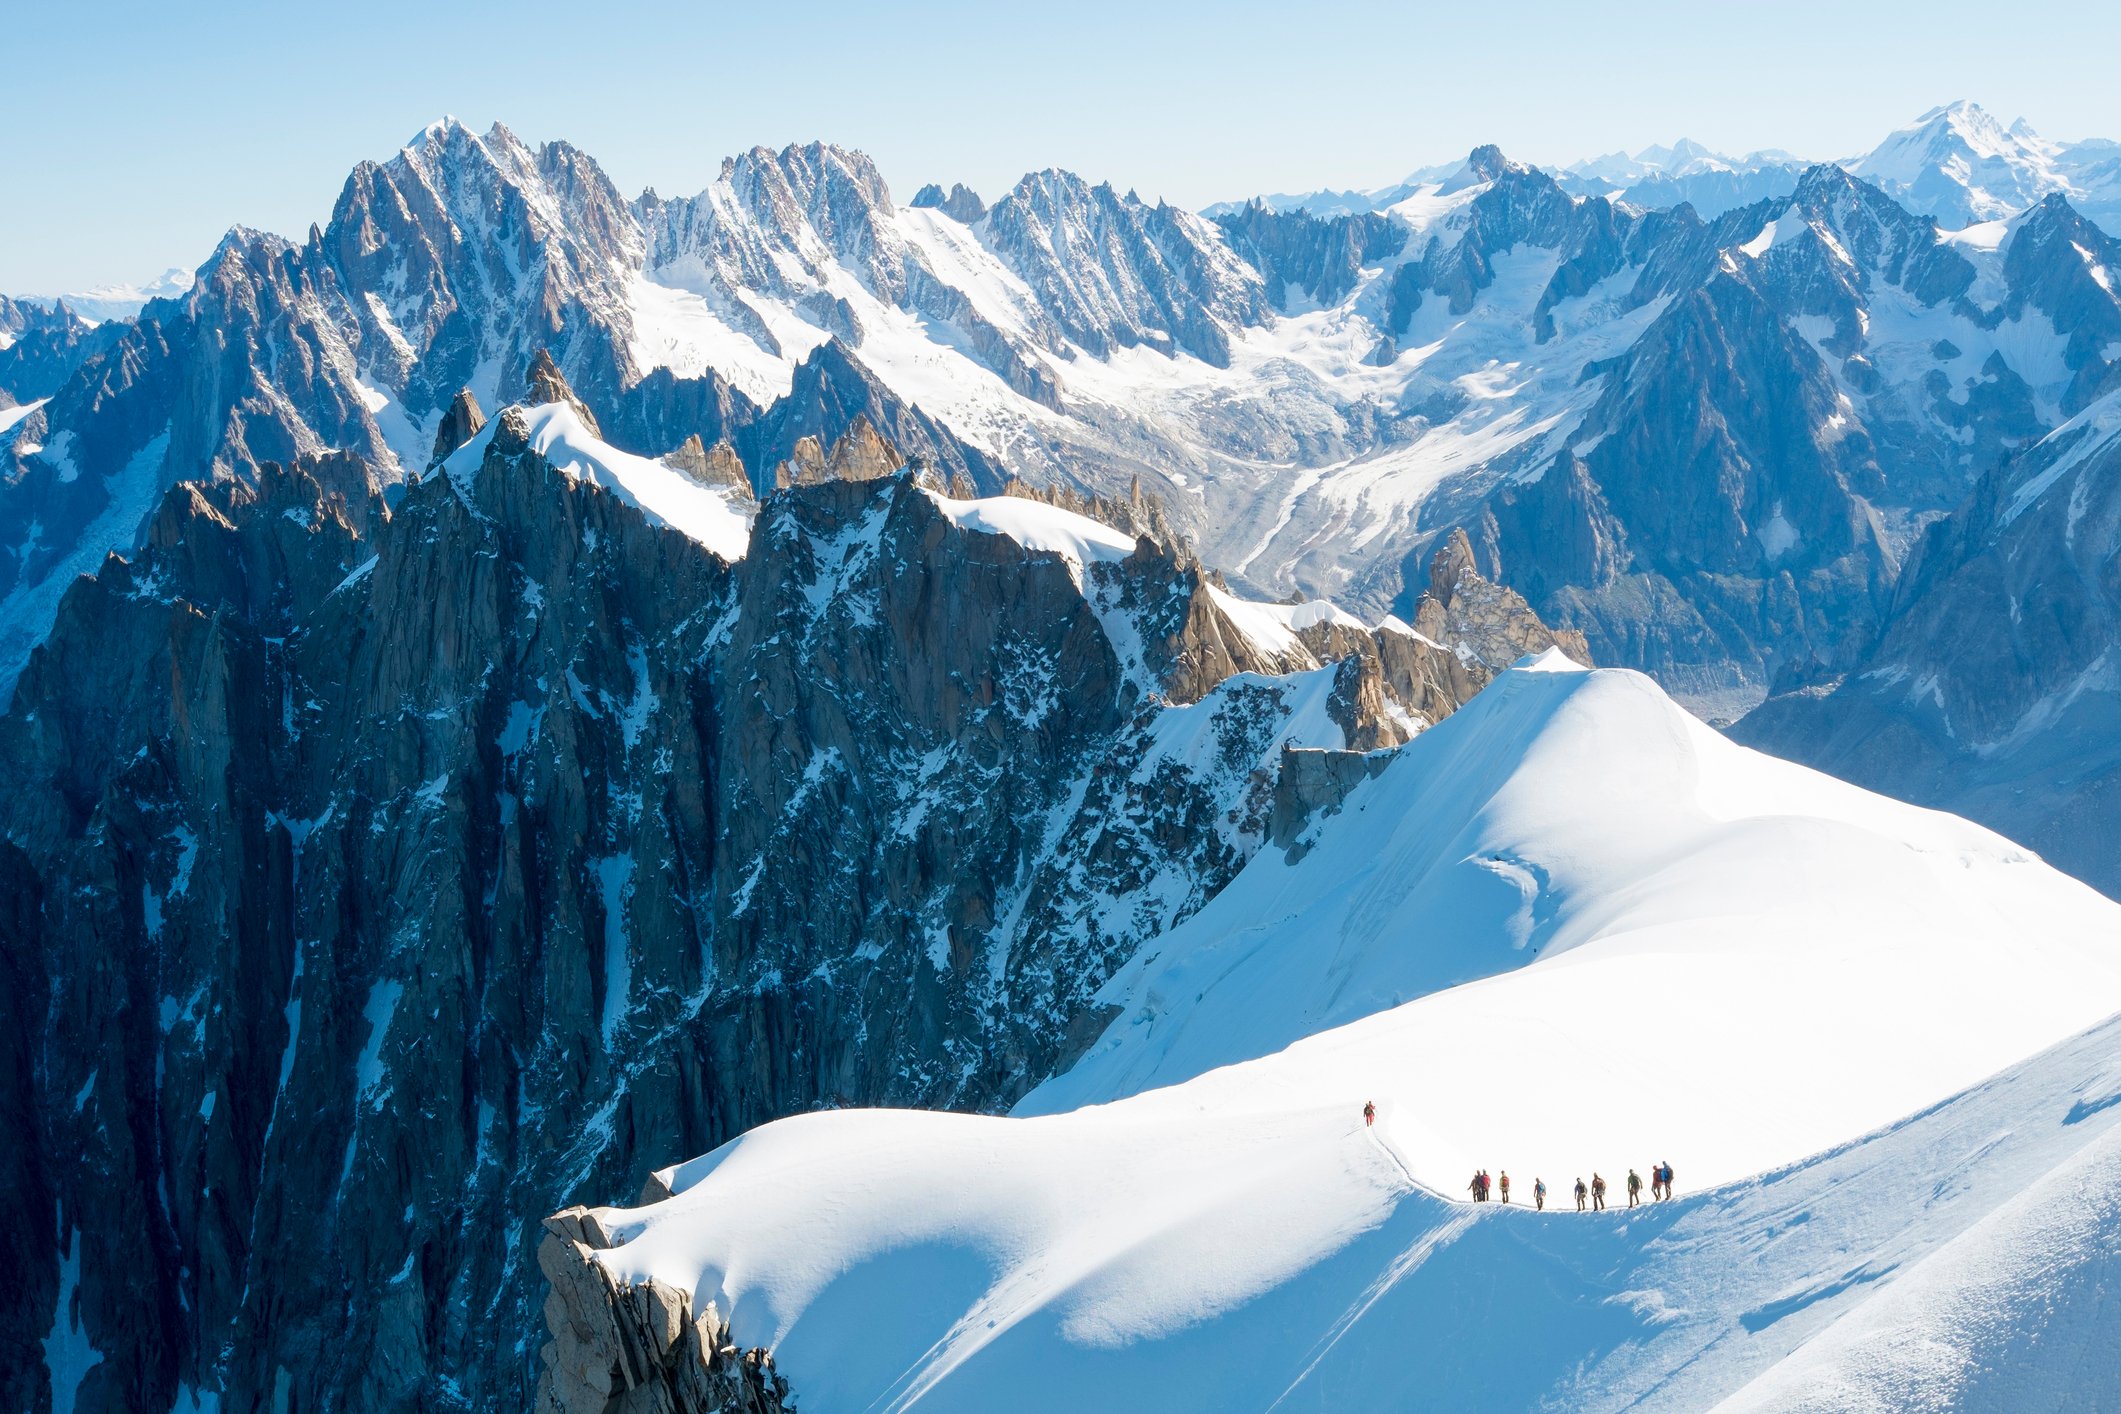 Mountaineers on Mont Blanc, in the French Alps.